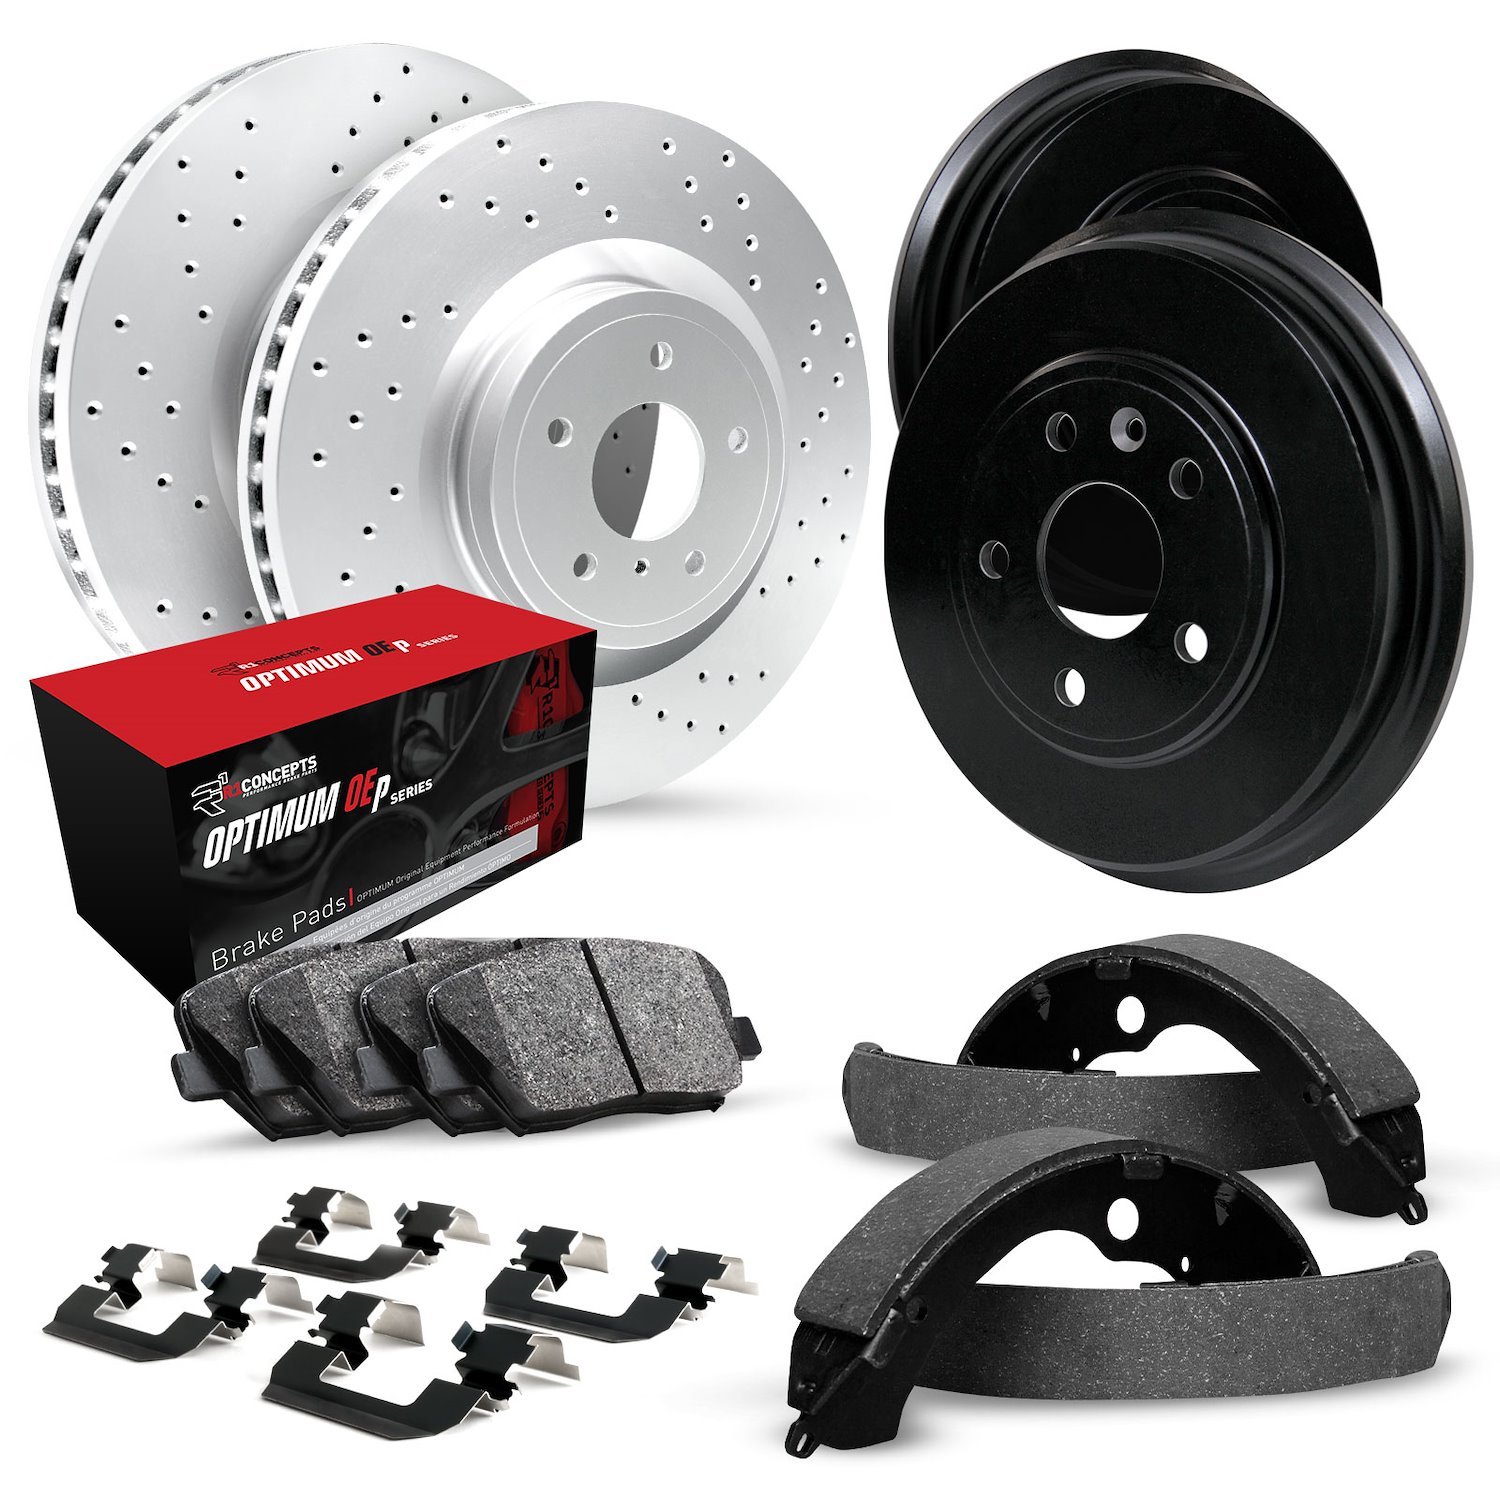 GEO-Carbon Drilled Brake Rotor & Drum Set w/Optimum OE Pads, Shoes, & Hardware, 1991-1991 GM, Position: Front & Rear